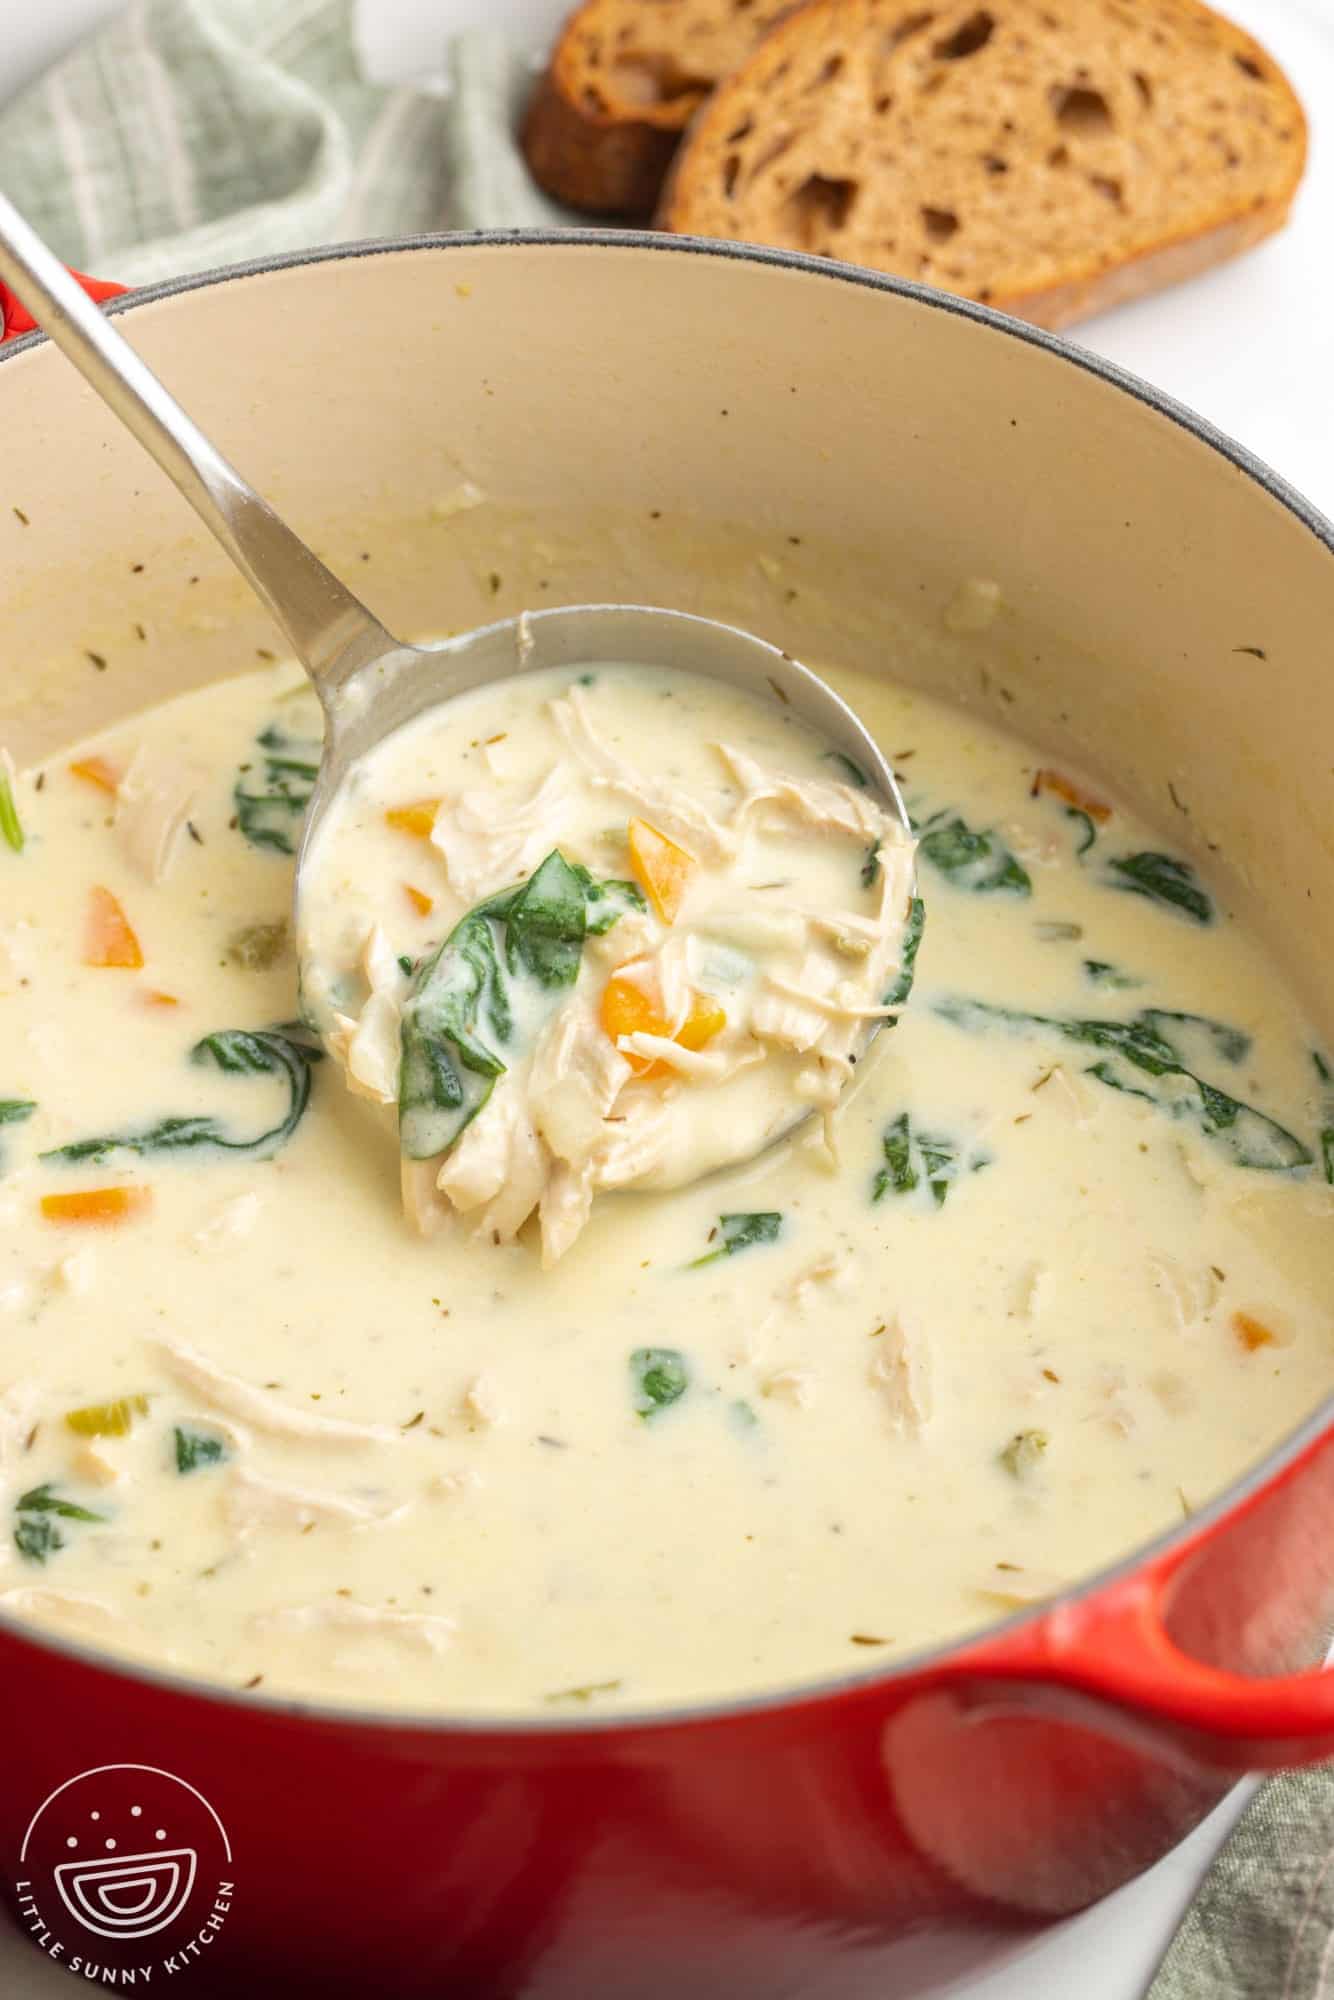 a pot of chicken florentine soup. A ladle is lifting up a serving filled with shredded chicken, carrots, and spinach.